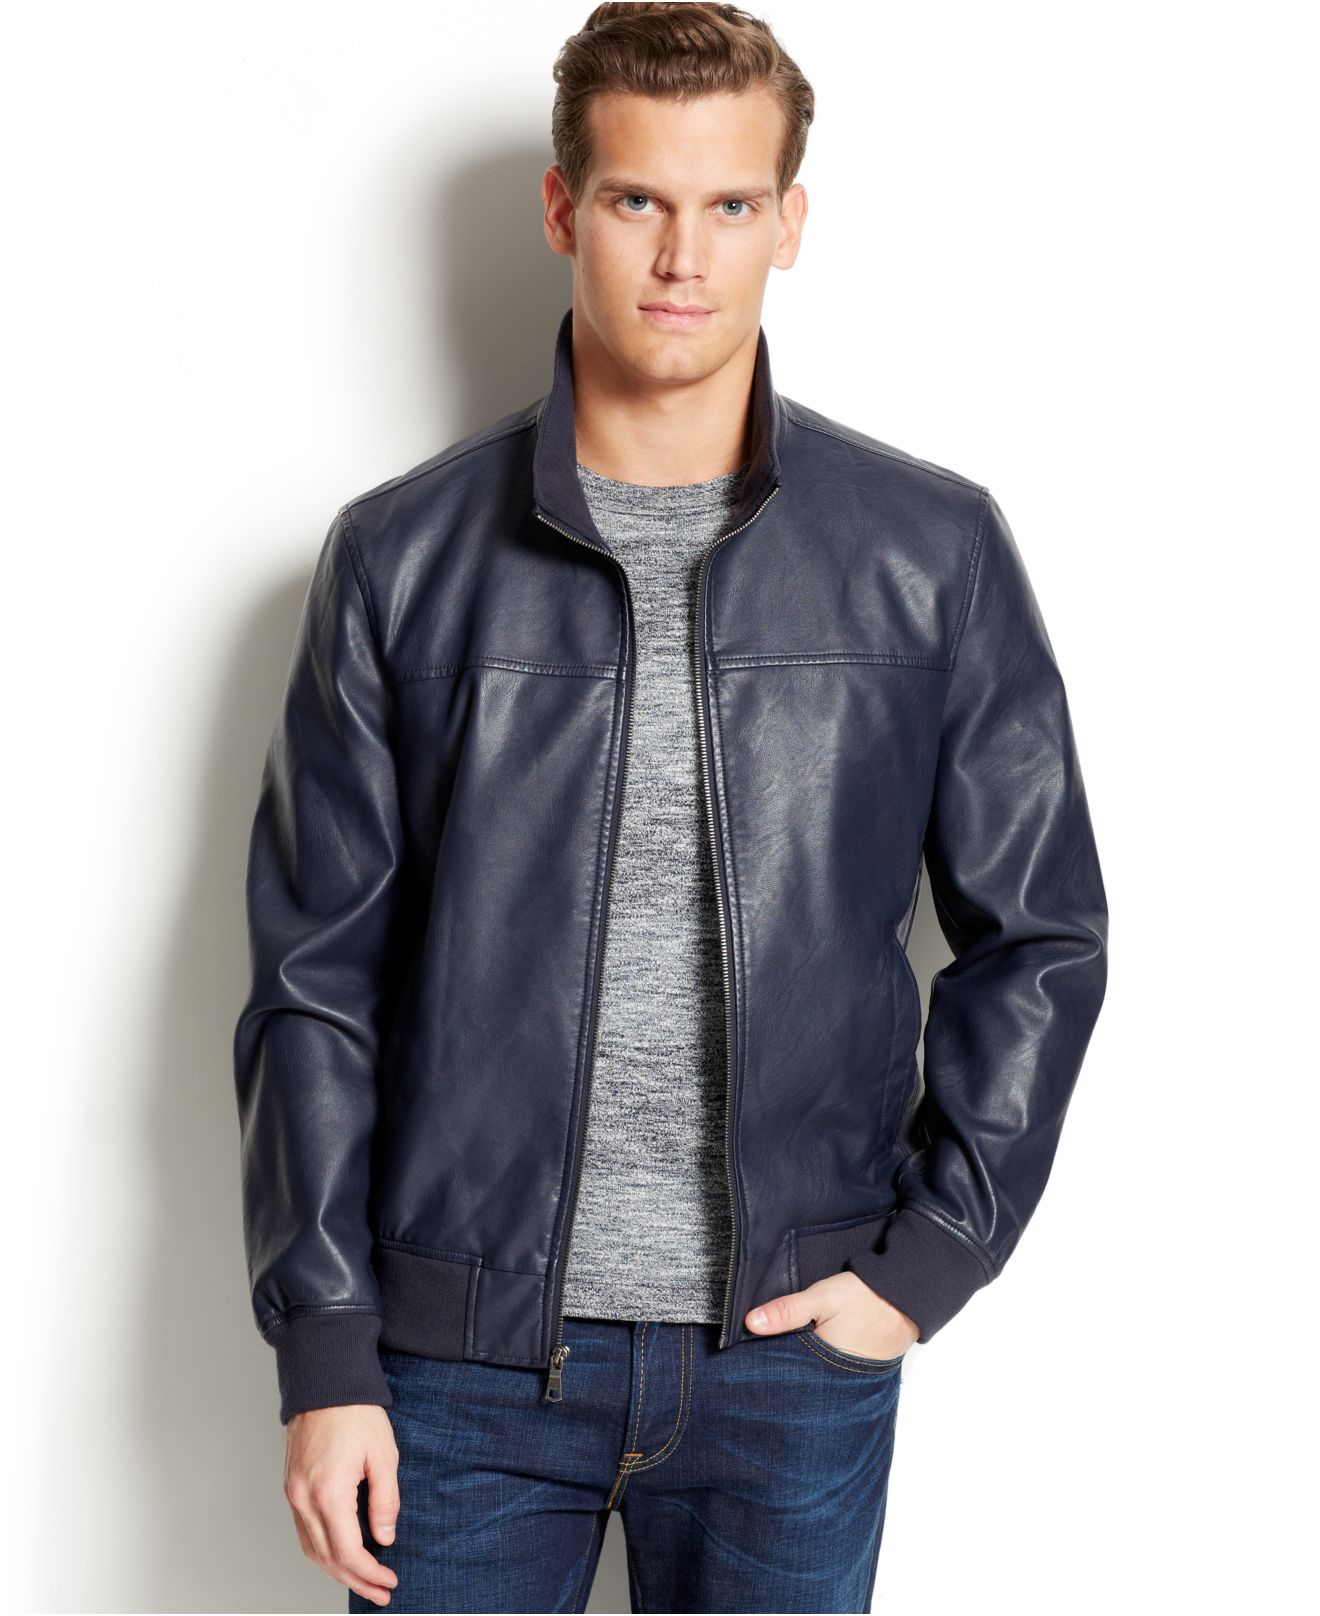 Tommy Hilfiger Faux Leather Bomber Jacket in Navy (Blue) for Men - Lyst